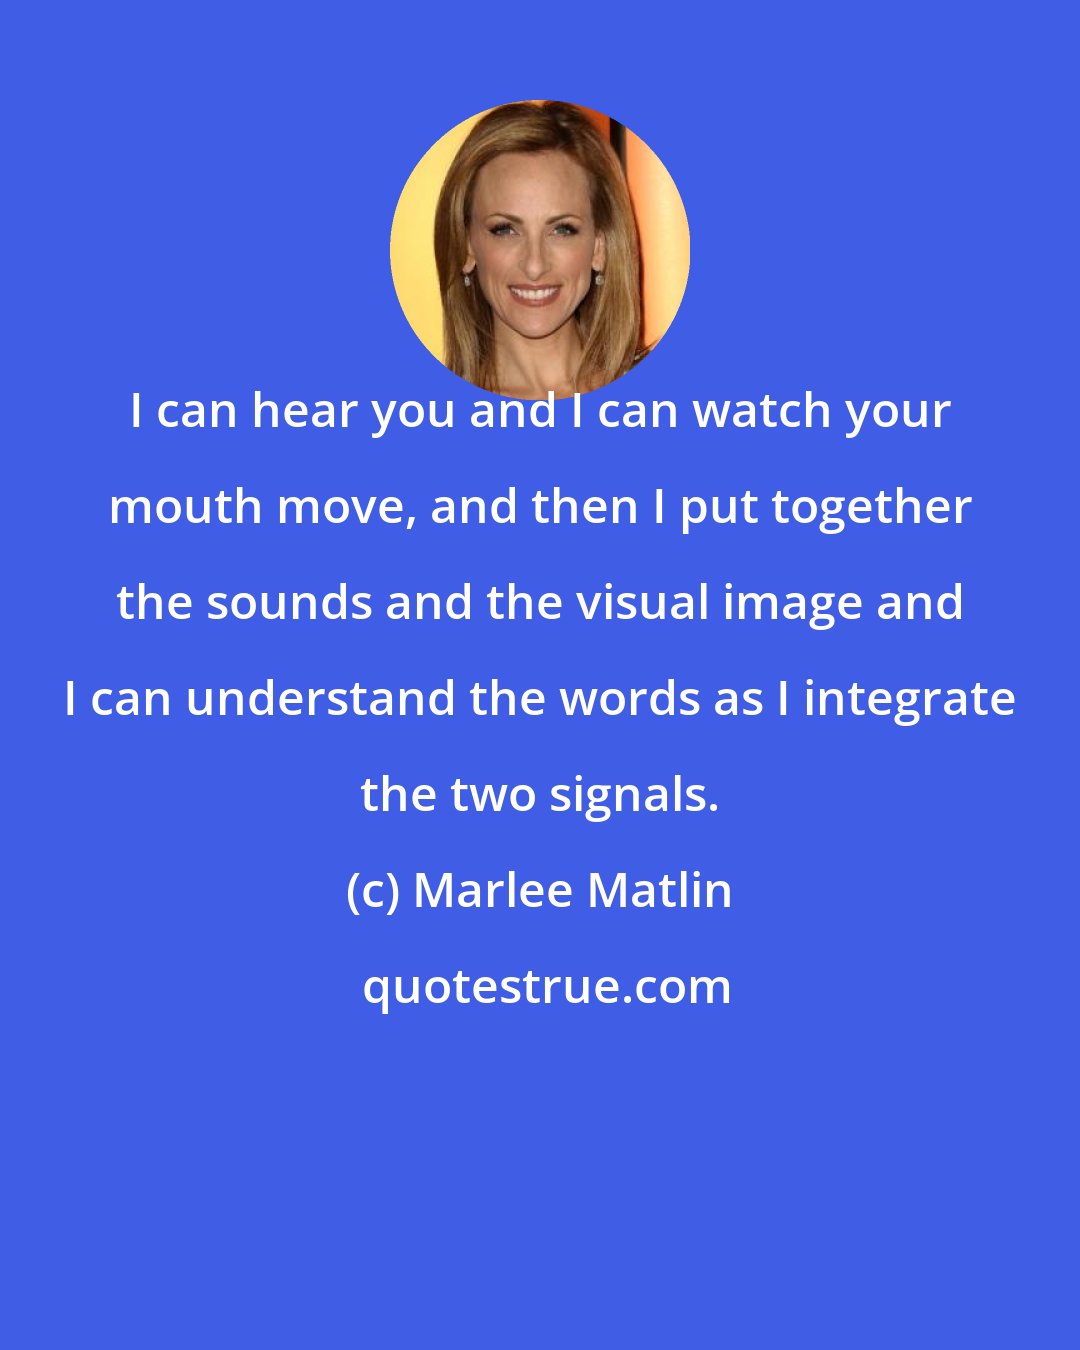 Marlee Matlin: I can hear you and I can watch your mouth move, and then I put together the sounds and the visual image and I can understand the words as I integrate the two signals.